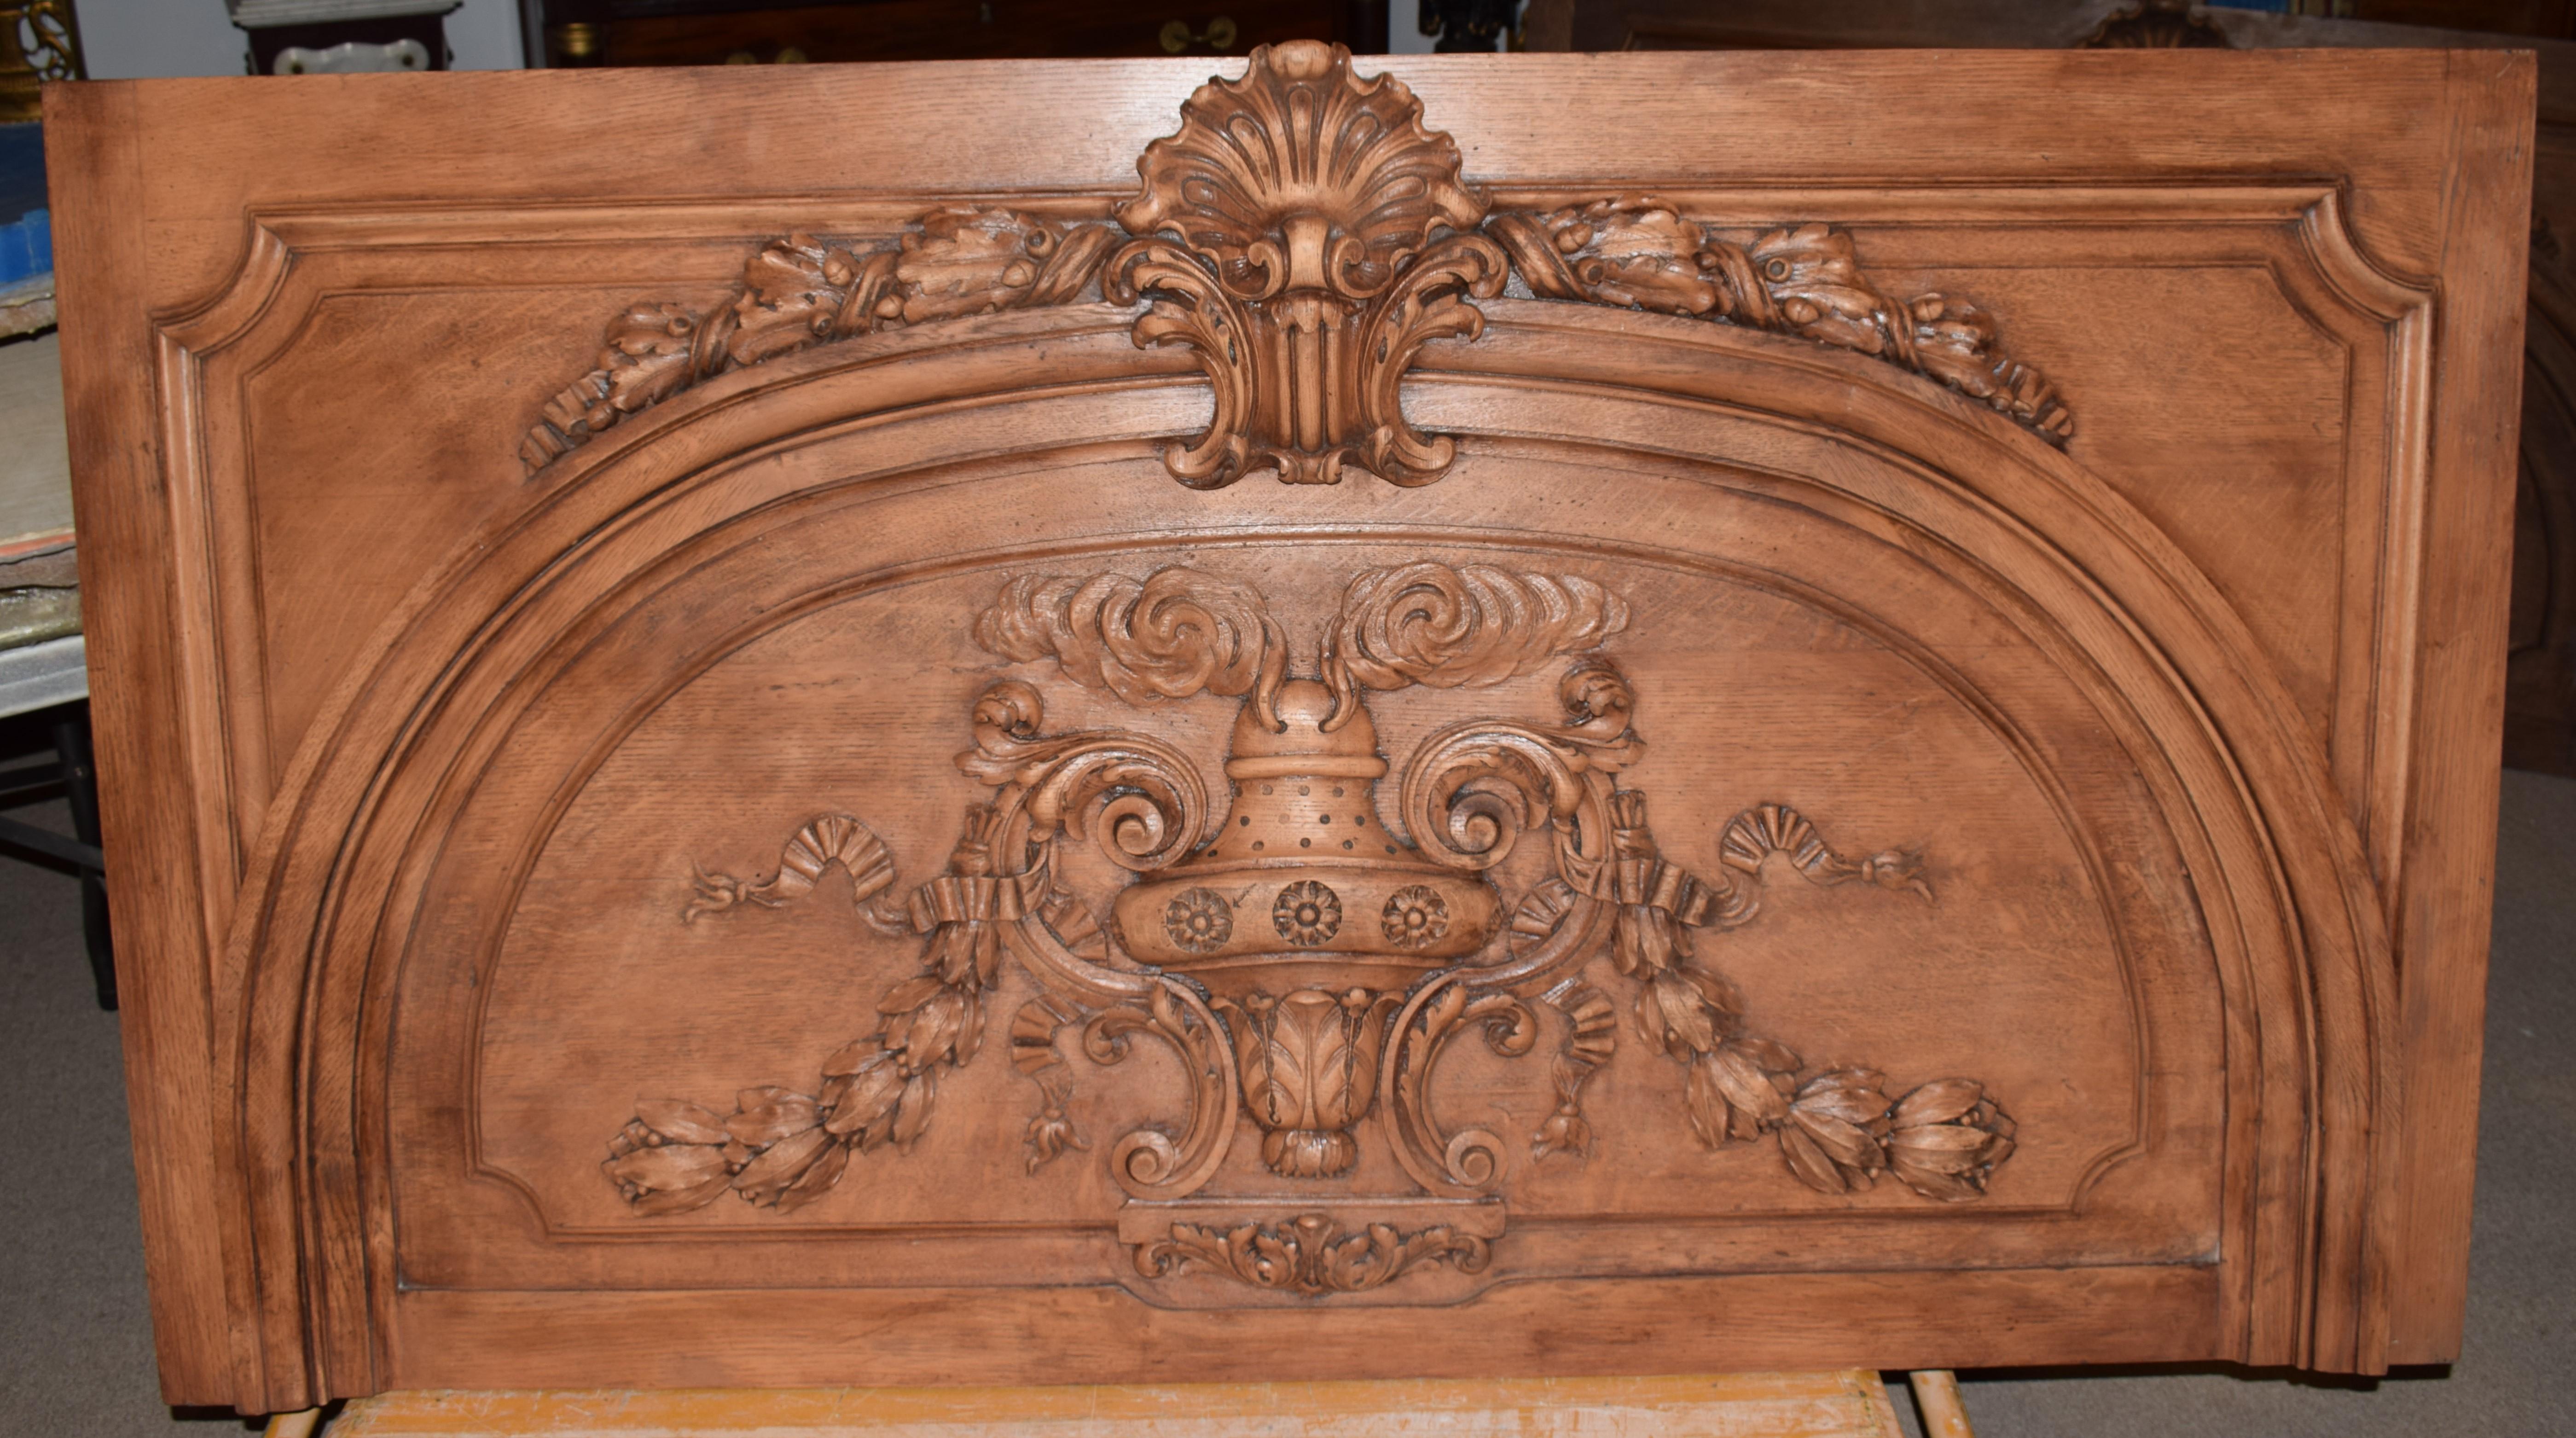 A magnificent rectangular over door panel, in the center a brazier flanked by two laurel garlands and flowing ribbons. At the top, elaborate cresting incorporating shell motif and oak garlands.
From our gallery of fine reproductions.
Dimensions: